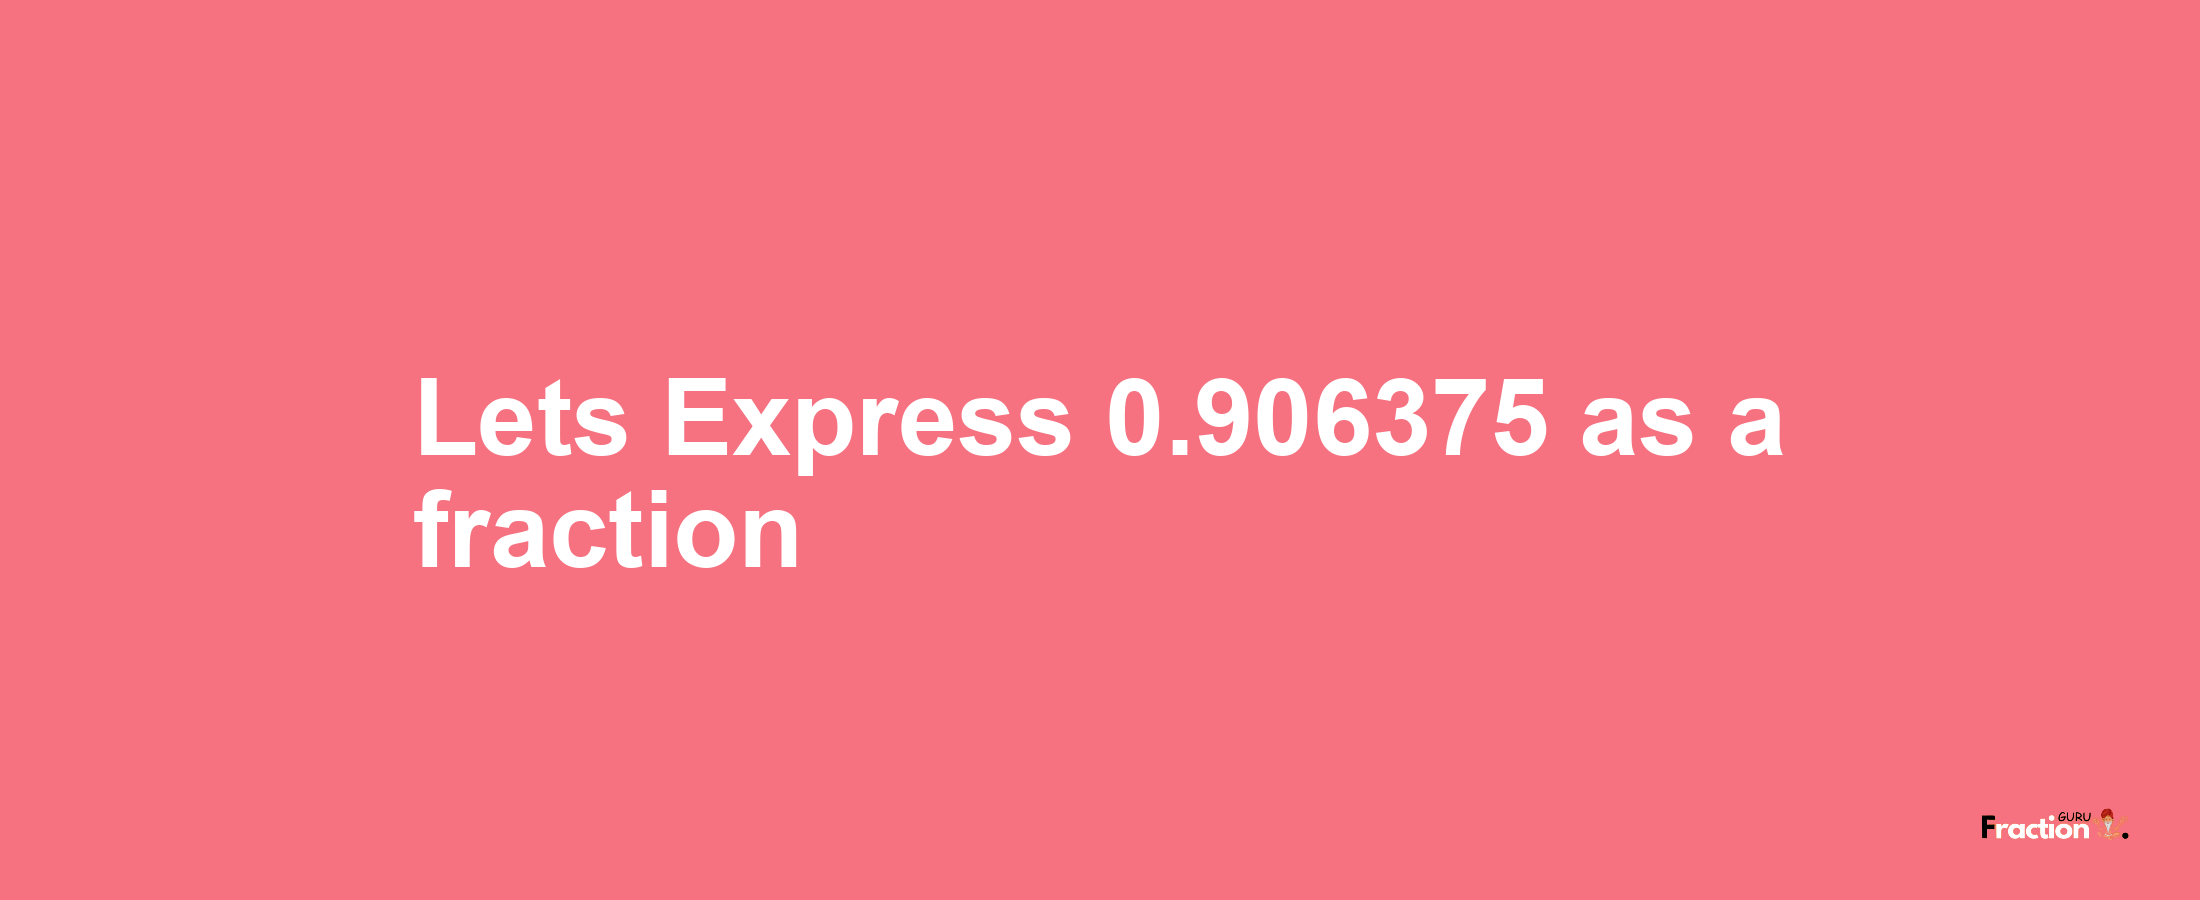 Lets Express 0.906375 as afraction